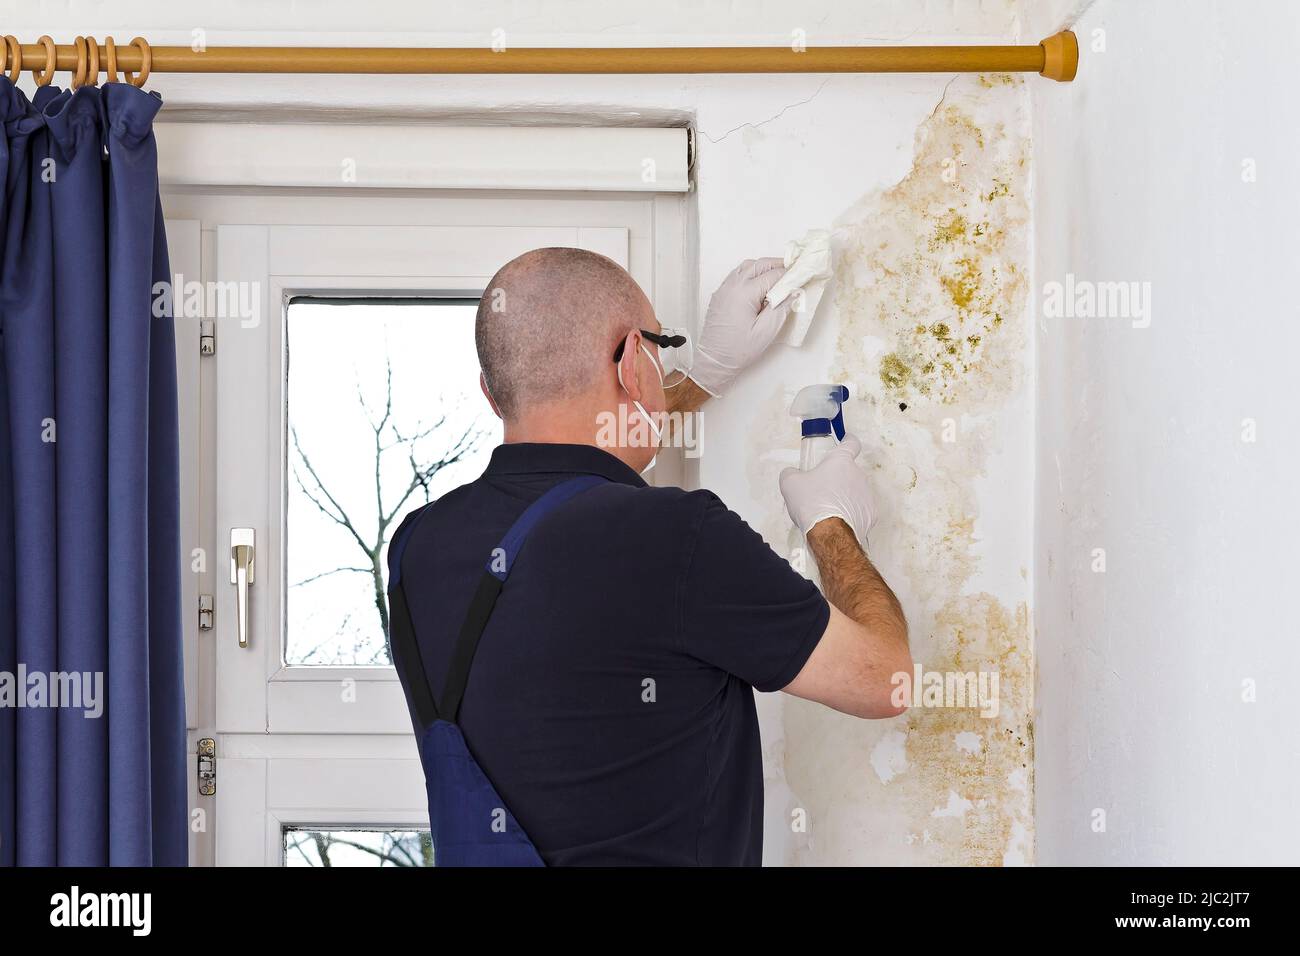 Man removing mold or mildew growing behind the drapes of an external wall in an old house with antifungal spray and tissues. Stock Photo